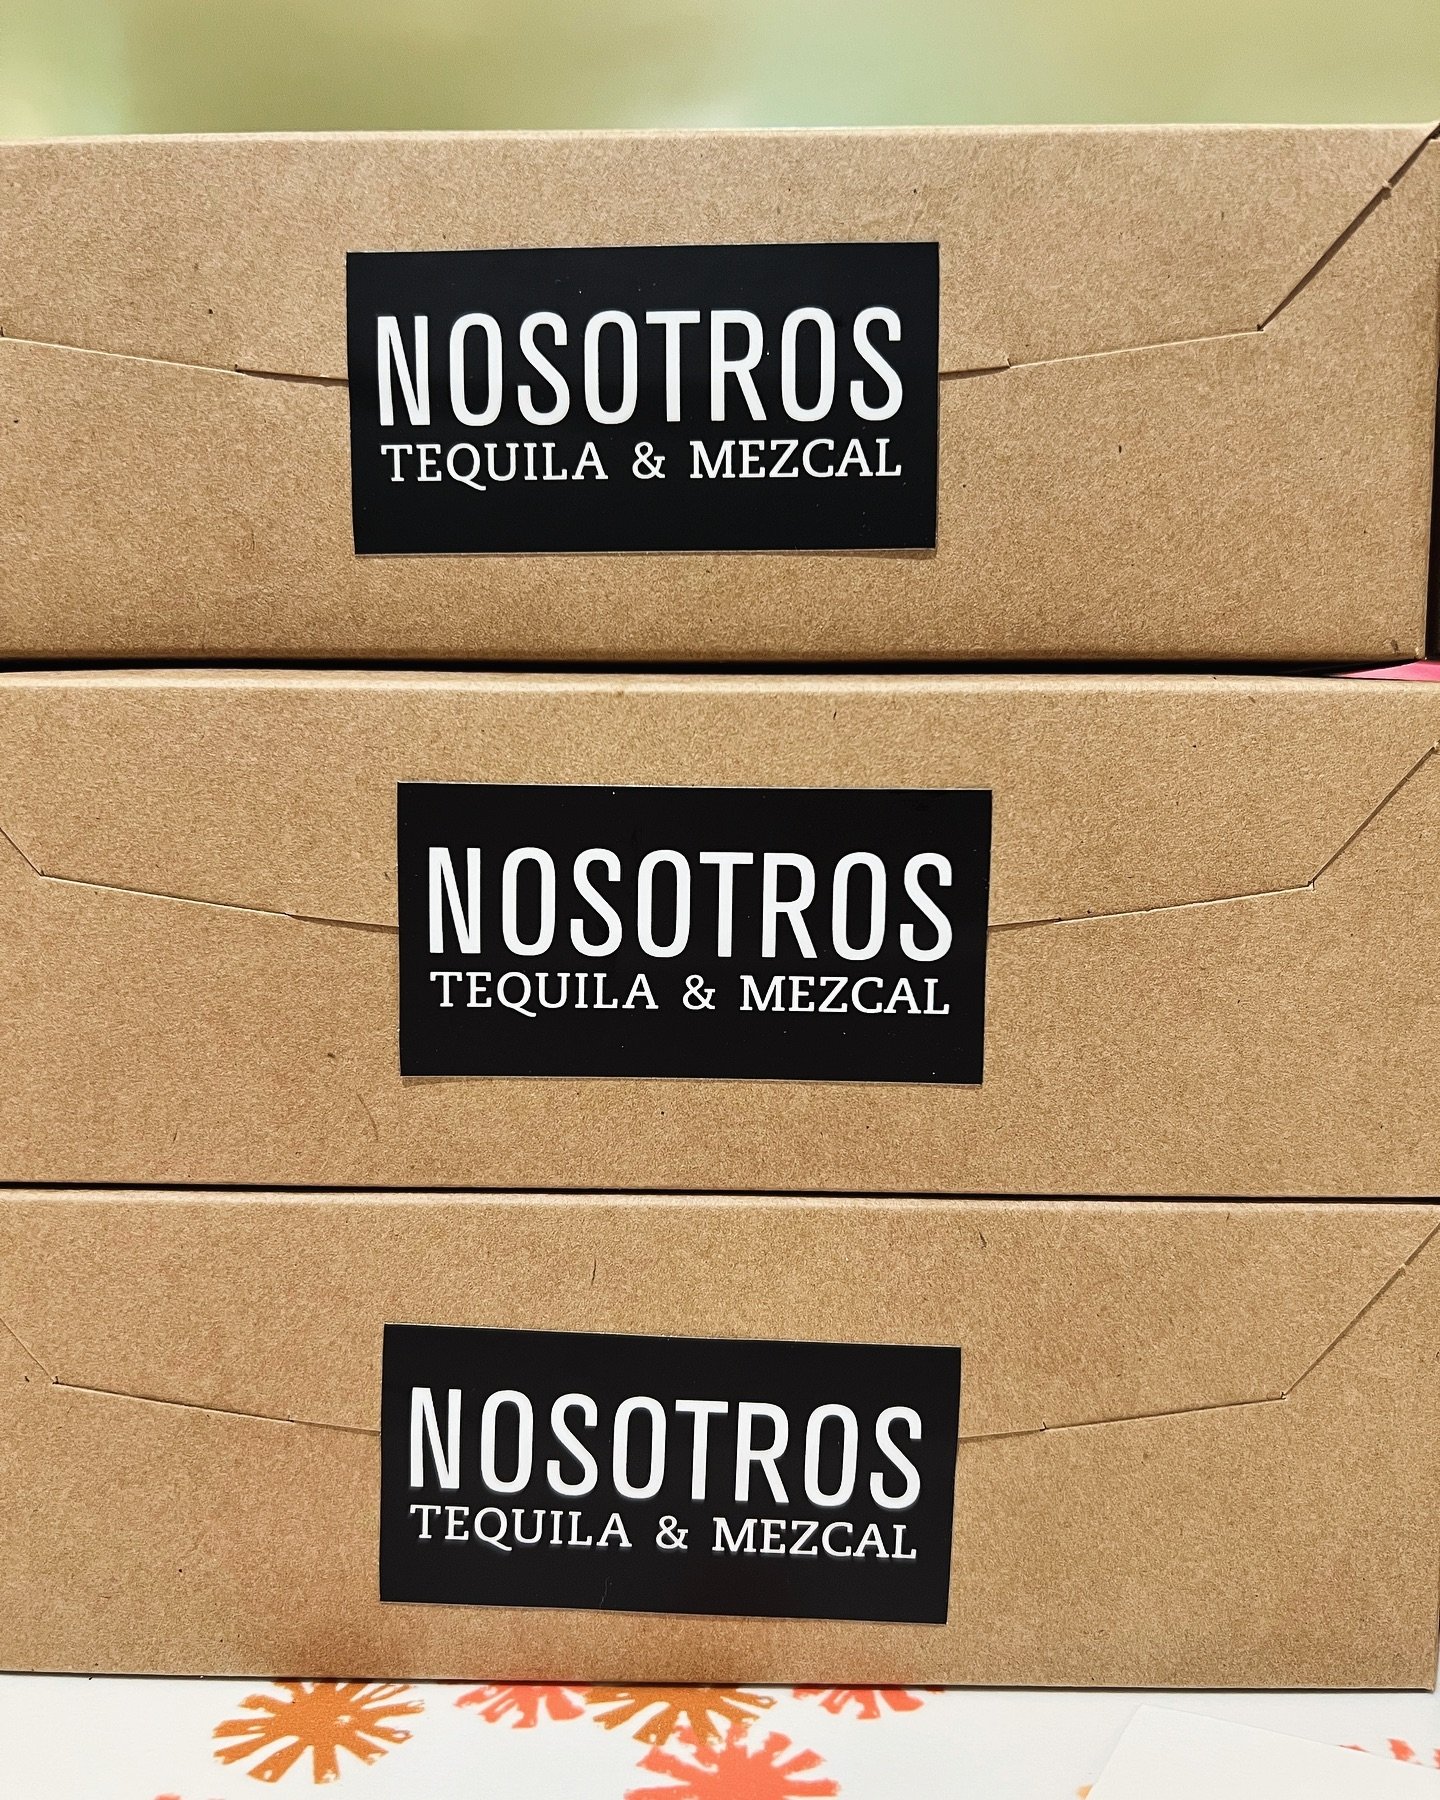 Our @nosotros Mini Mezcal Donut Flights are ready for you! 

Each box contains the following flavors:
🍓Strawberry Margarita - Fresh strawberries folded into an orange zest dough. Dipped in a strawberry tequila glaze.

🥓 Bacon Matador - Juicy pineap